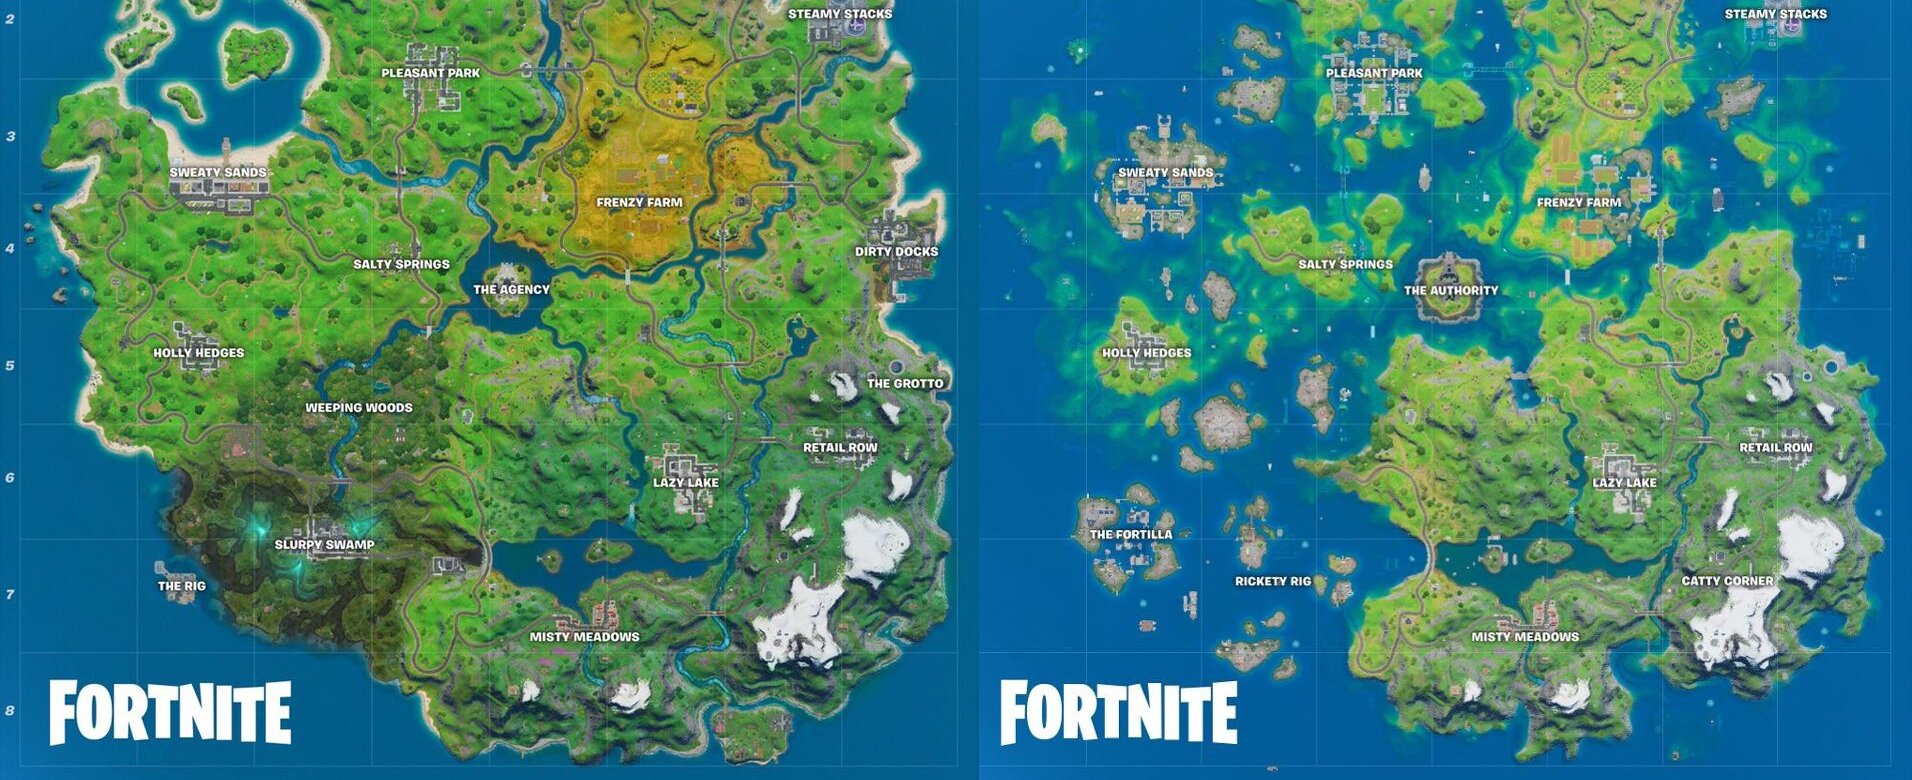 What do you think of the new Fortnite maps?